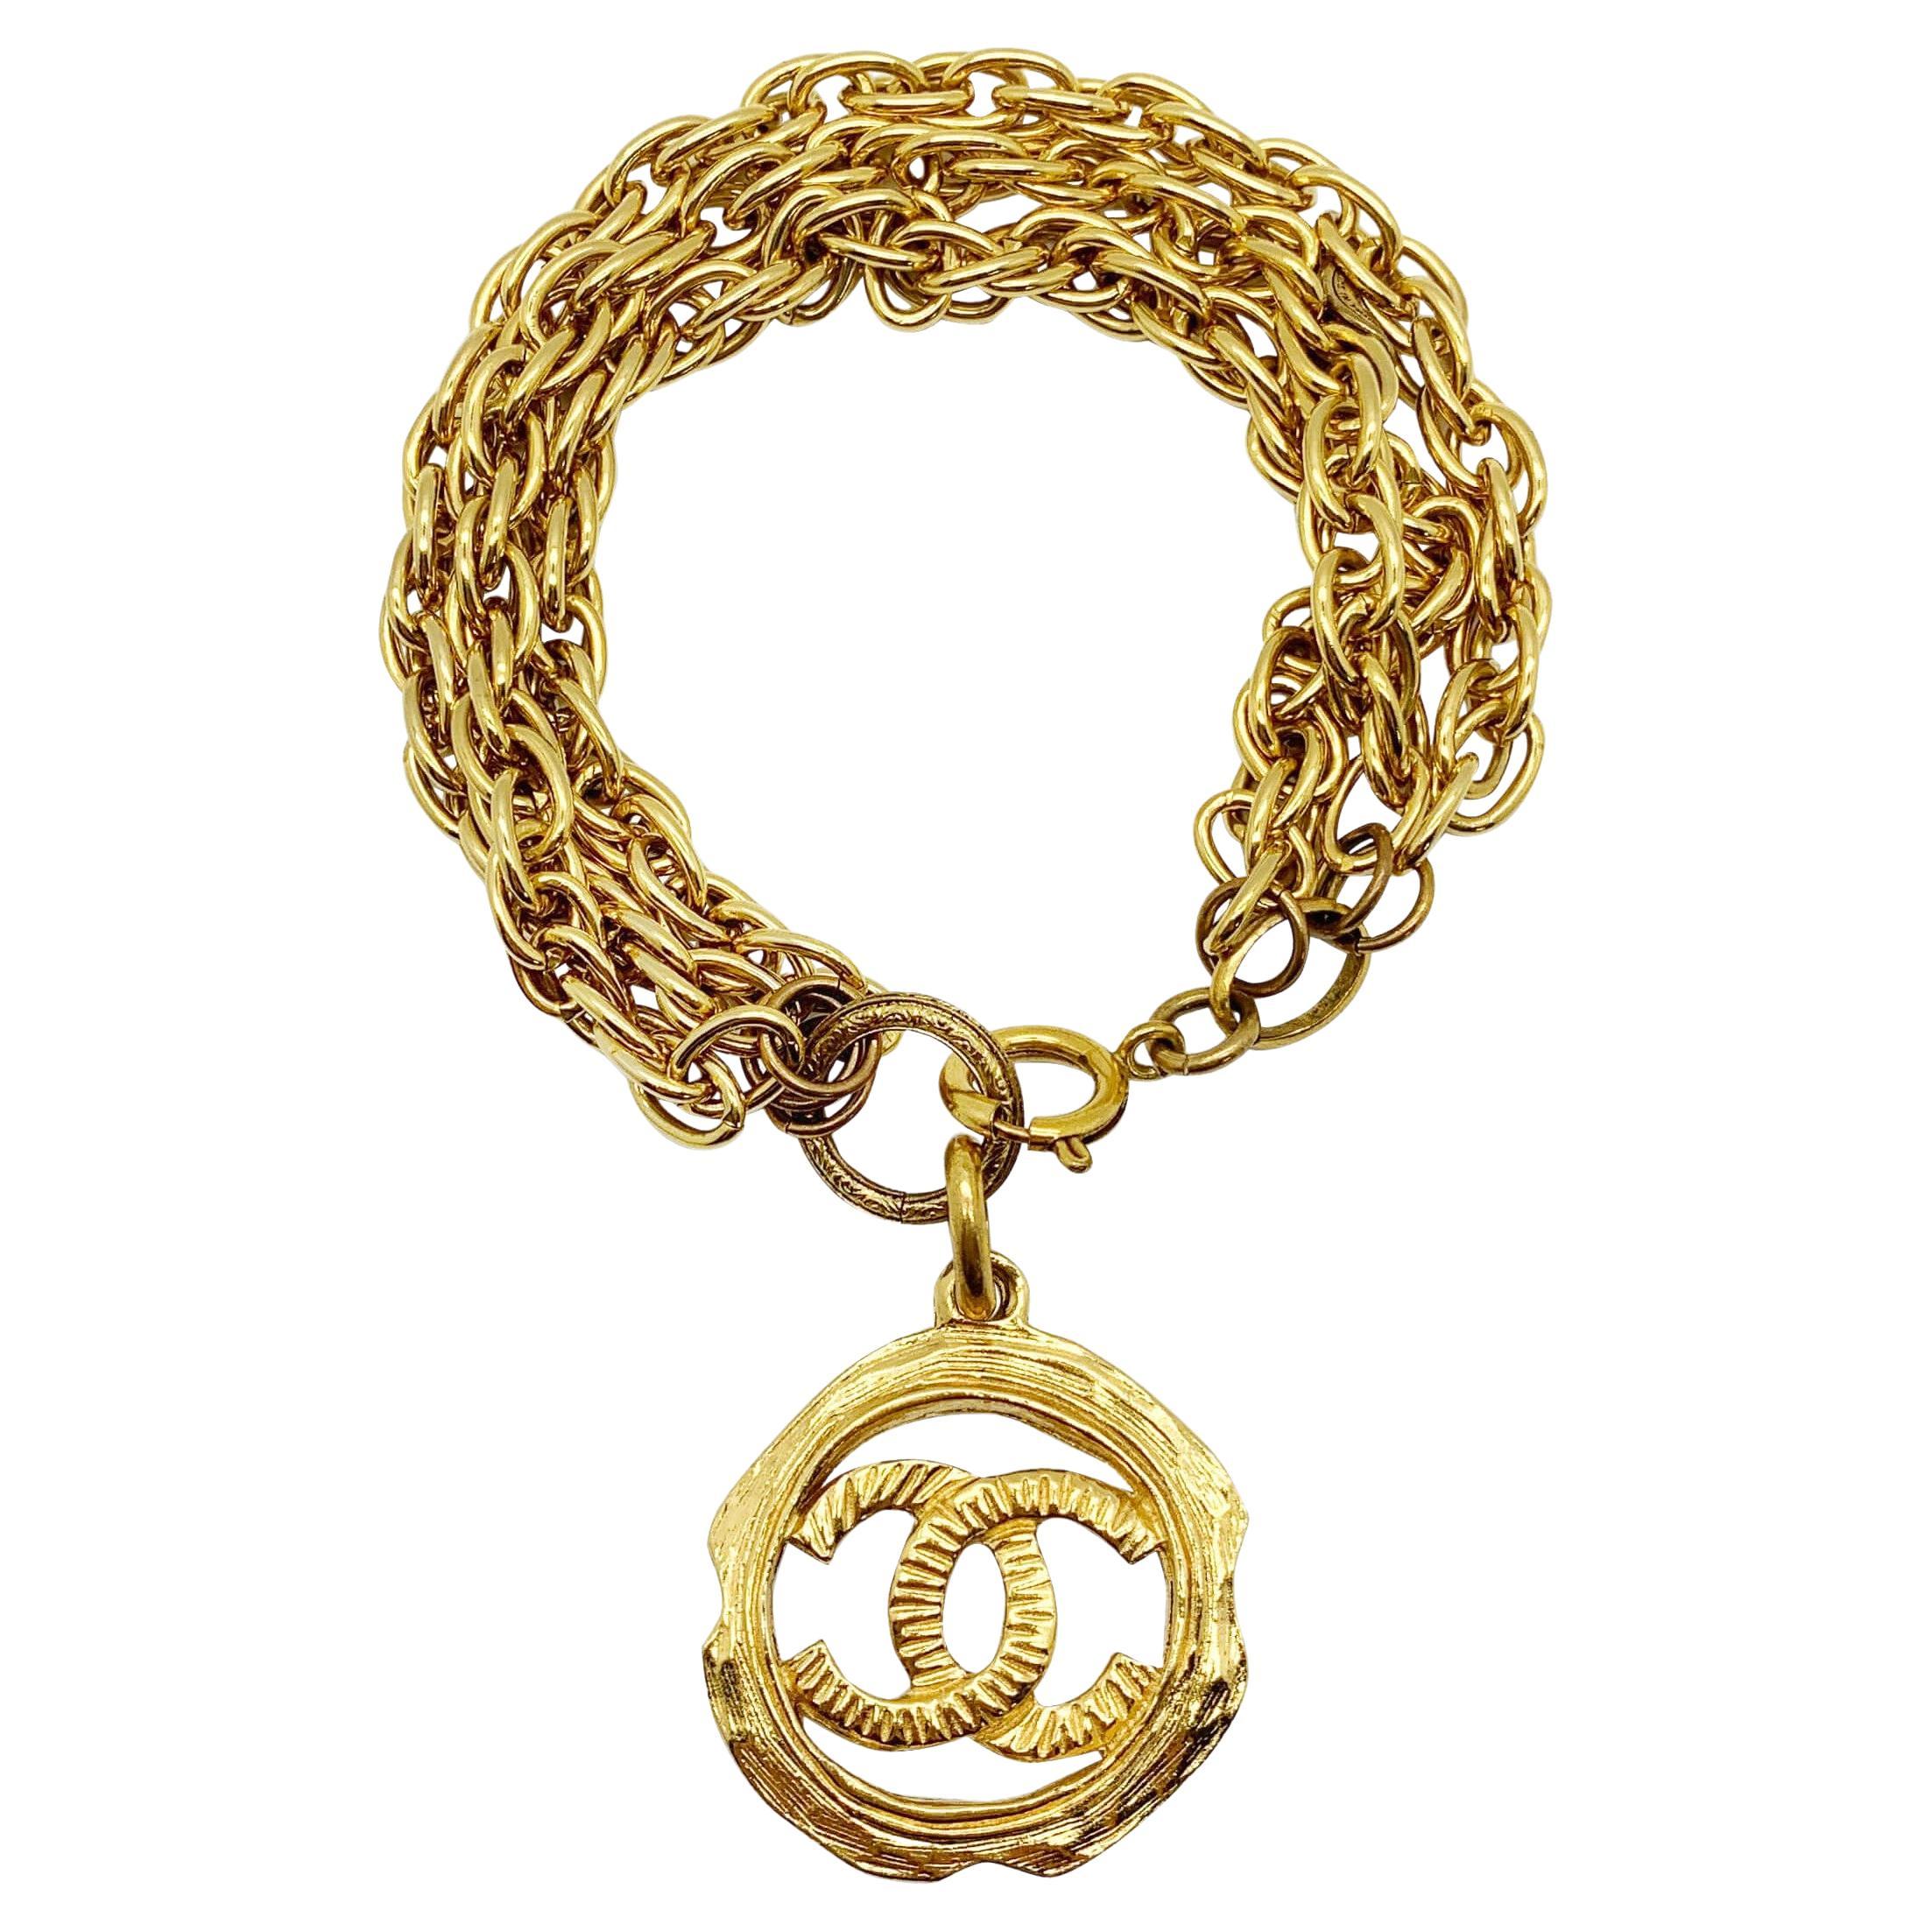 Vintage Chanel Chain Logo Charm Bracelet by Karl Lagerfeld 1980s For Sale